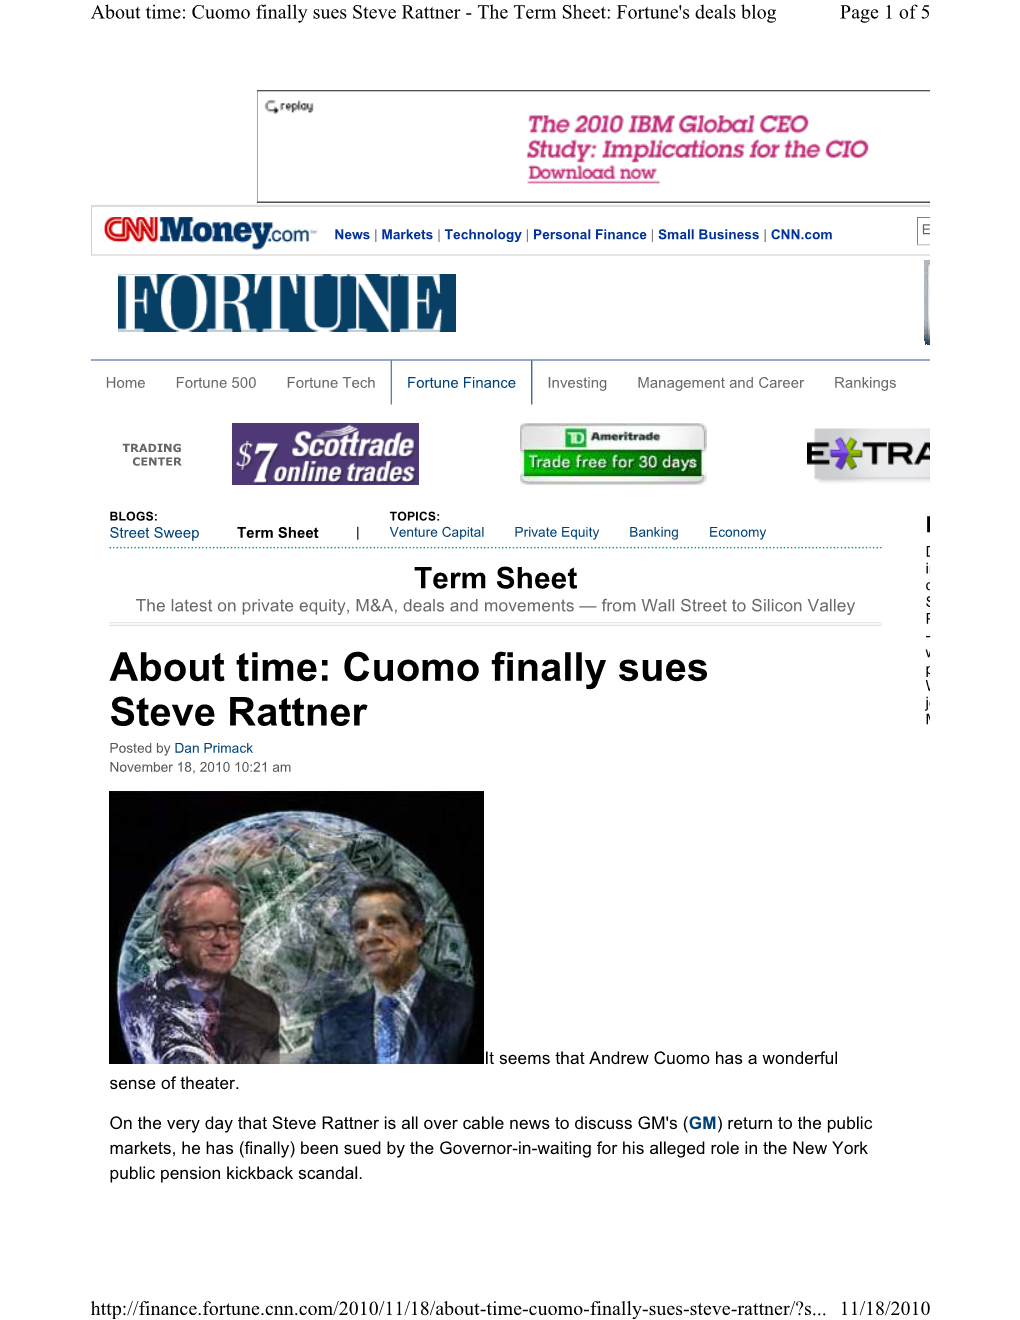 About Time: Cuomo Finally Sues Steve Rattner - the Term Sheet: Fortune's Deals Blog Page 1 of 5